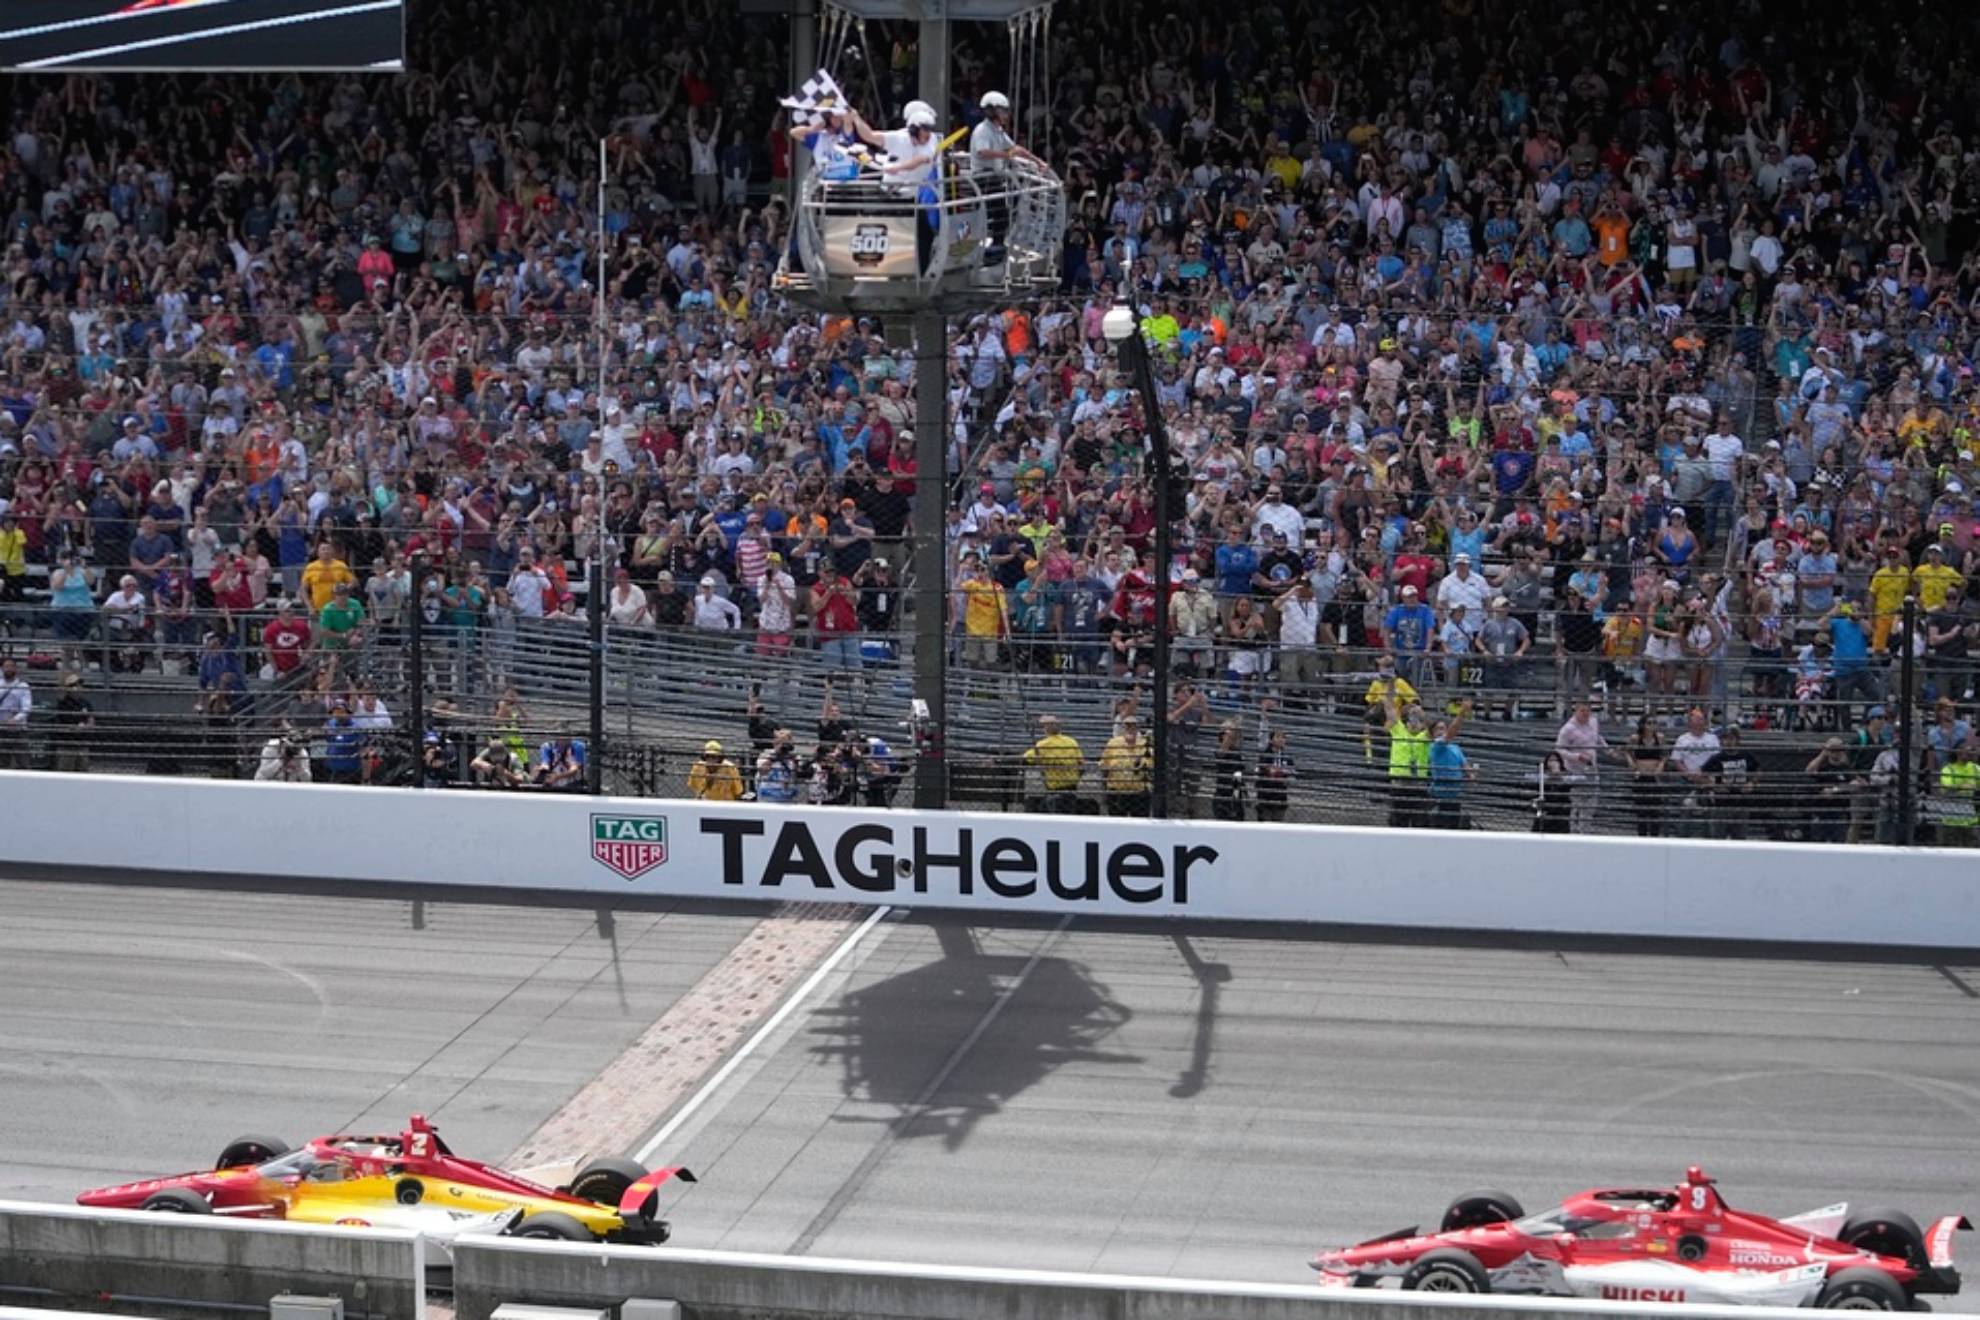 Josef Newgarden takes the checkered flag ahead of Marcus Ericsson, of Sweden, to win the Indianapolis 500 auto race